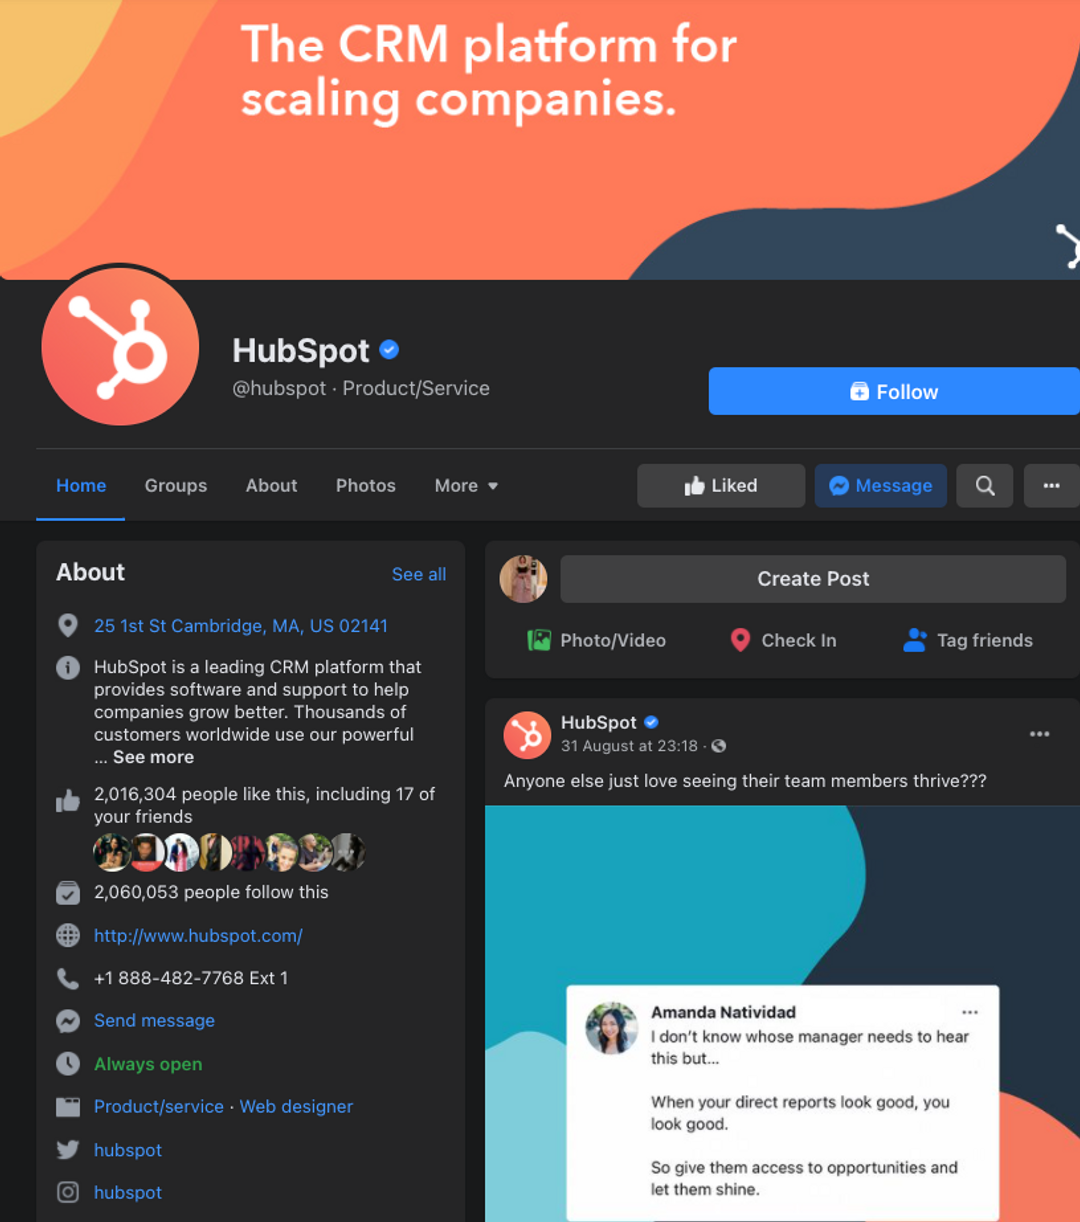 Hubspot's Facebook Page